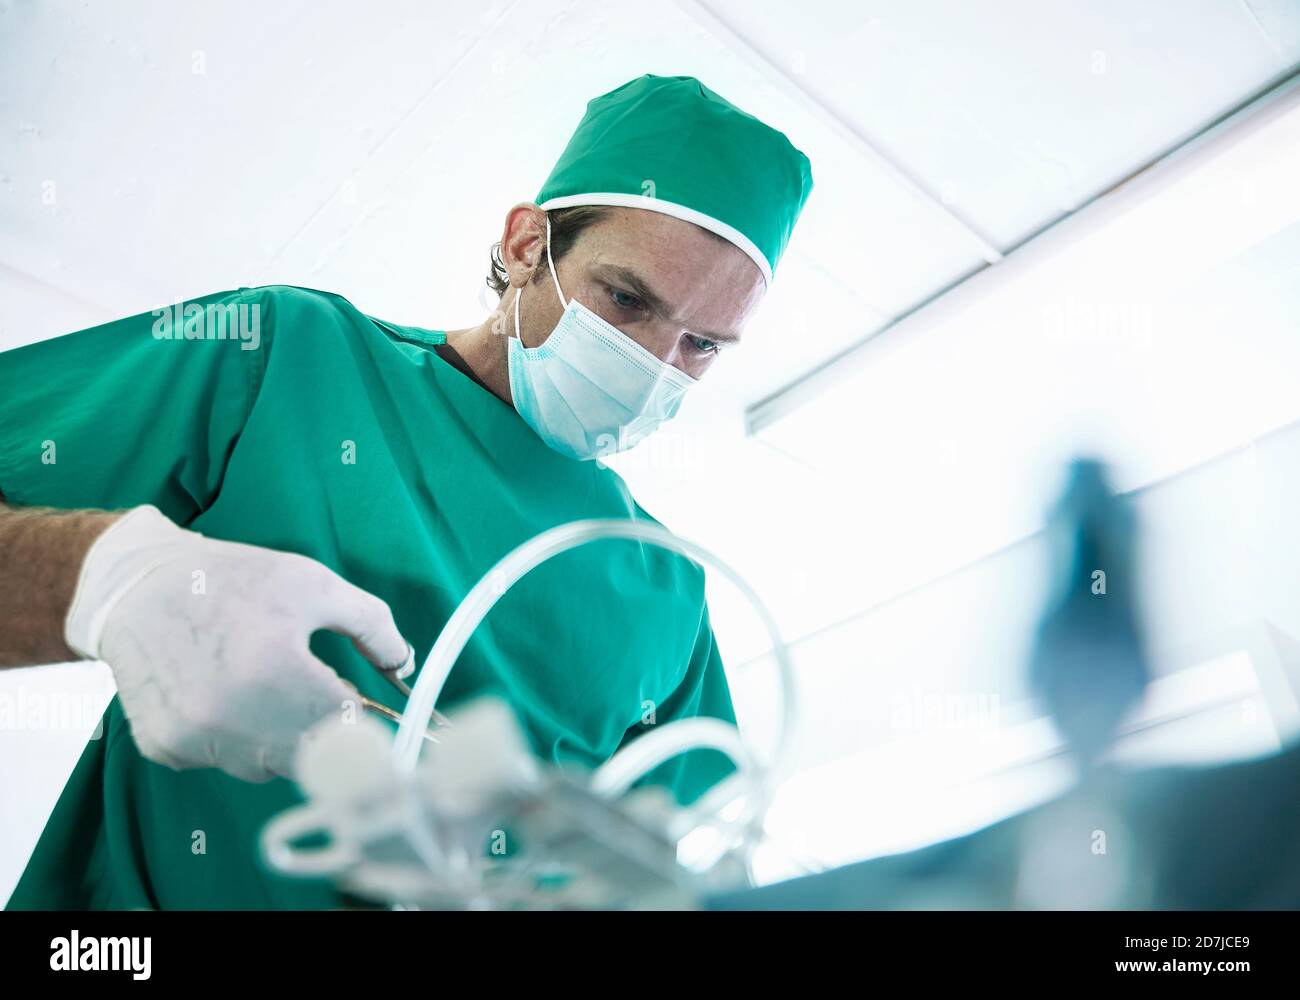 Male surgeon operating in illuminated intensive care unit at hospital Stock Photo